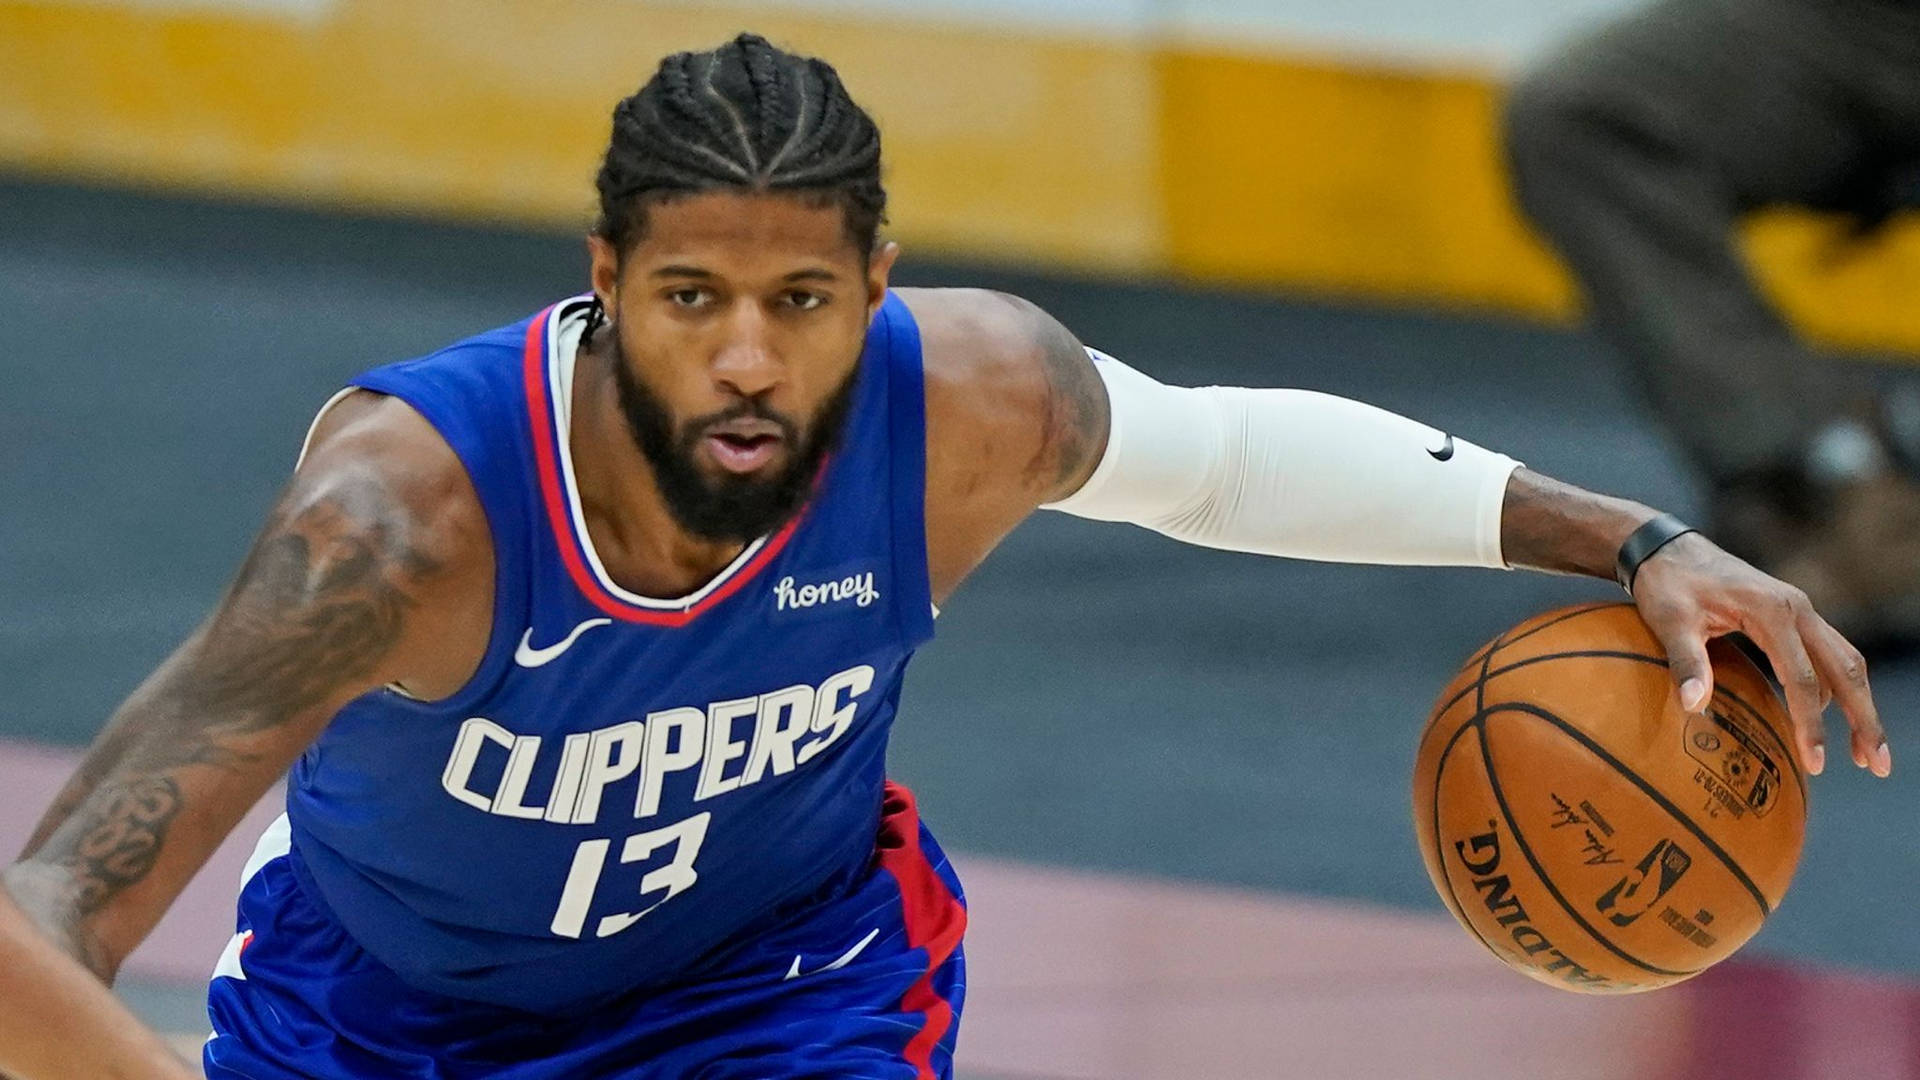 Paul George Blue Clippers Jersey